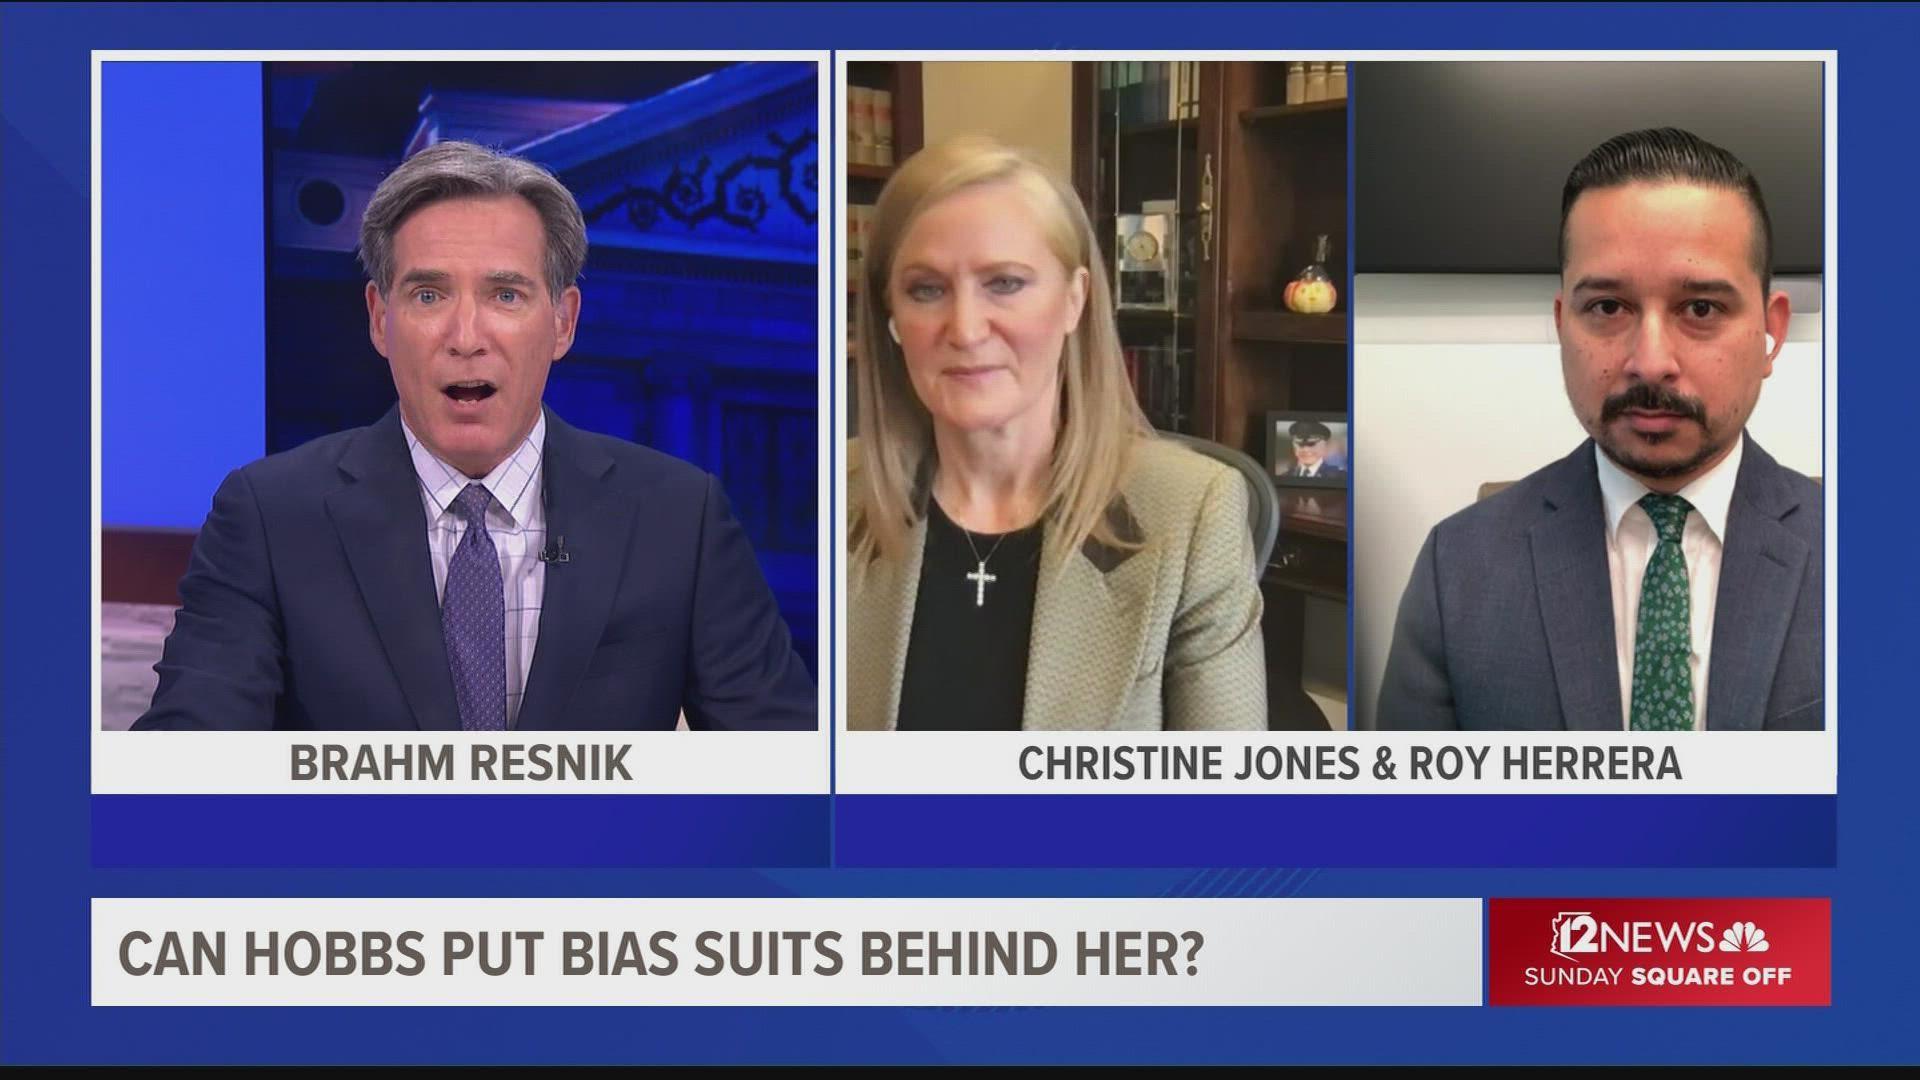 Our "Square Off" political insiders Christine Jones and Roy Herrera discuss